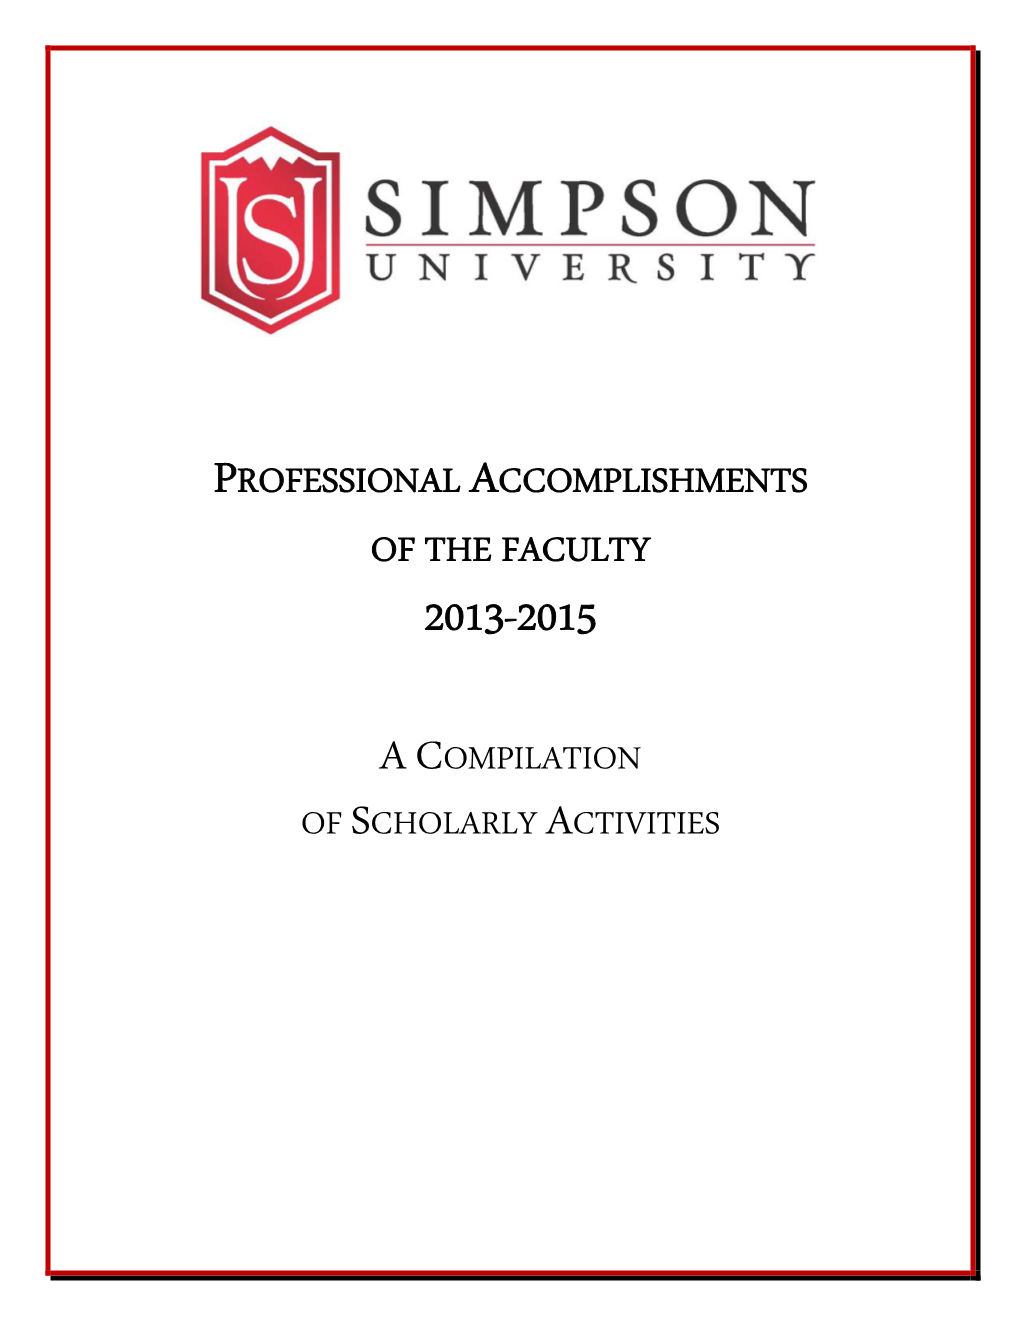 Professional Accomplishments of the Faculty 2013-2015